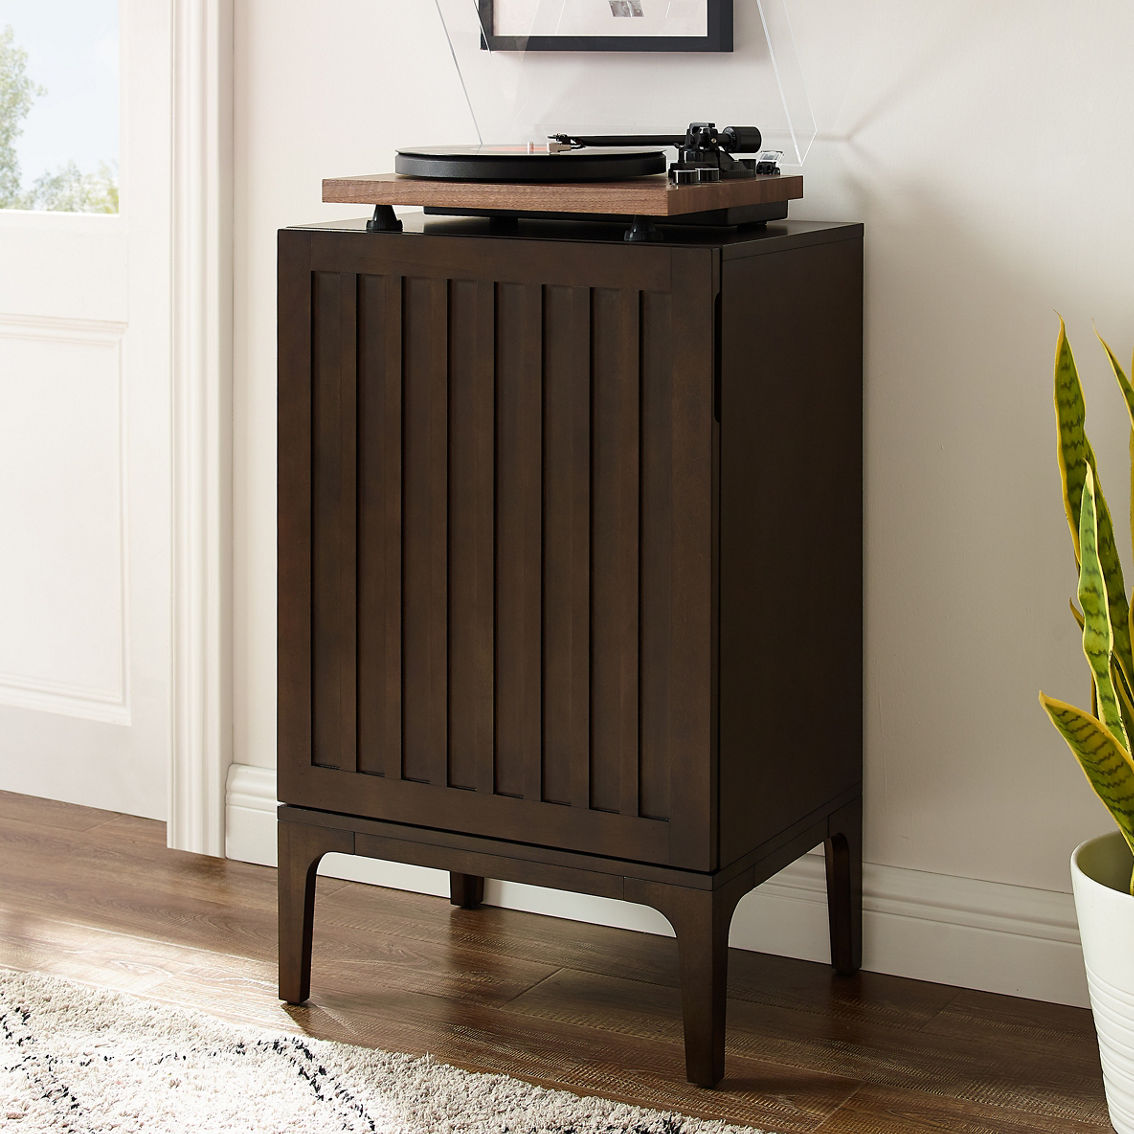 Crosley Furniture Asher Record Storage Stand - Image 5 of 7